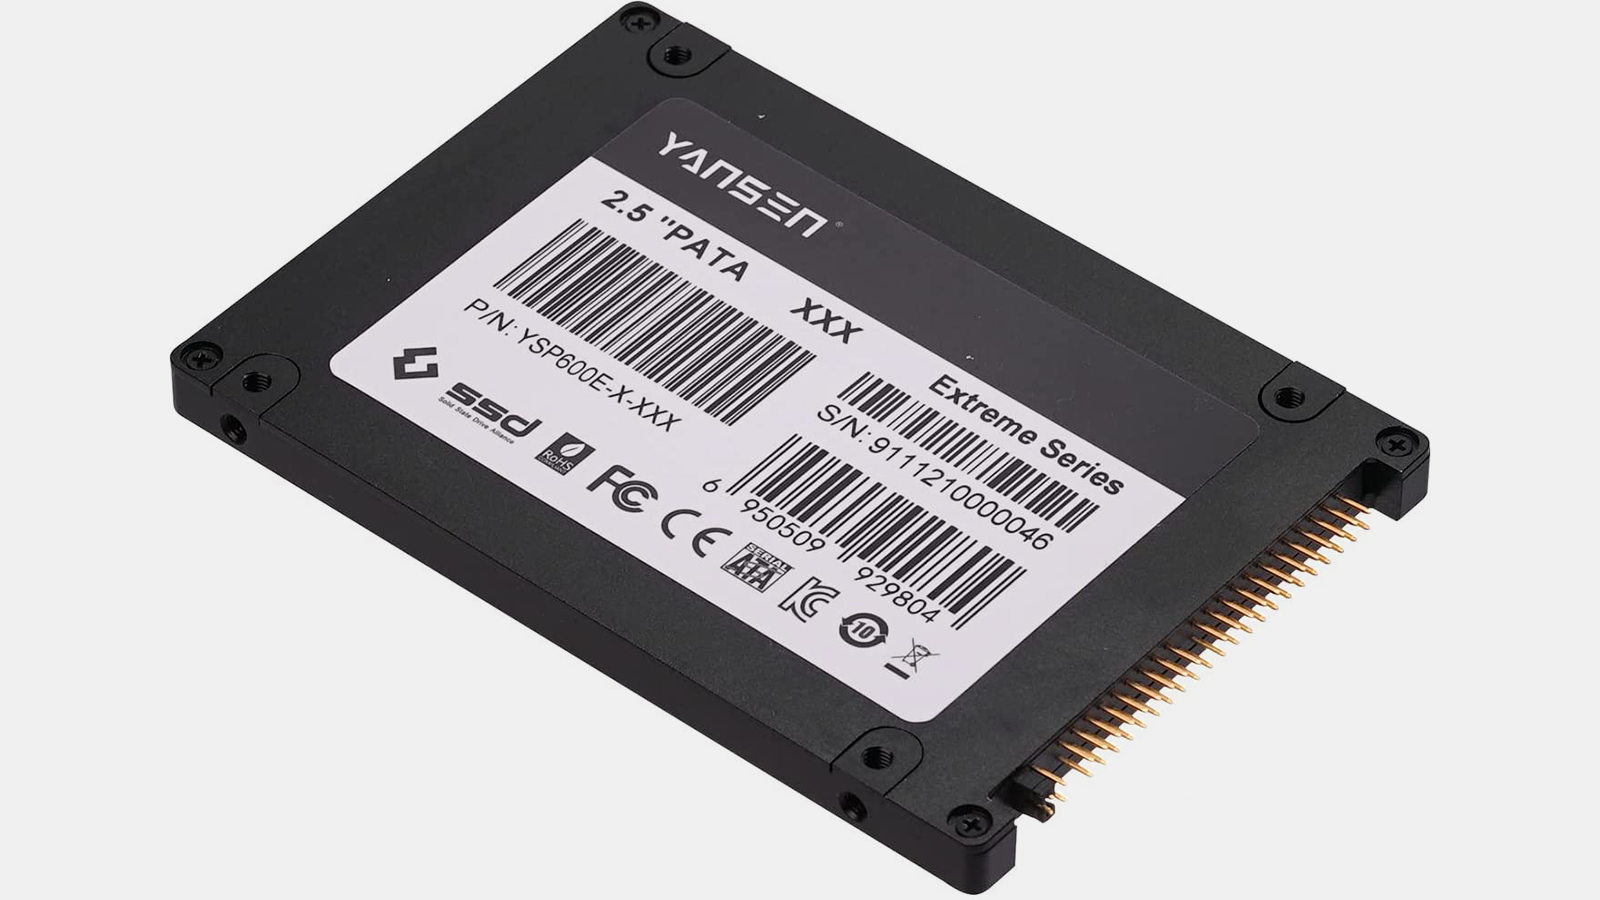 Enthusiast Brings IDE Back with 2.5-Inch SSD